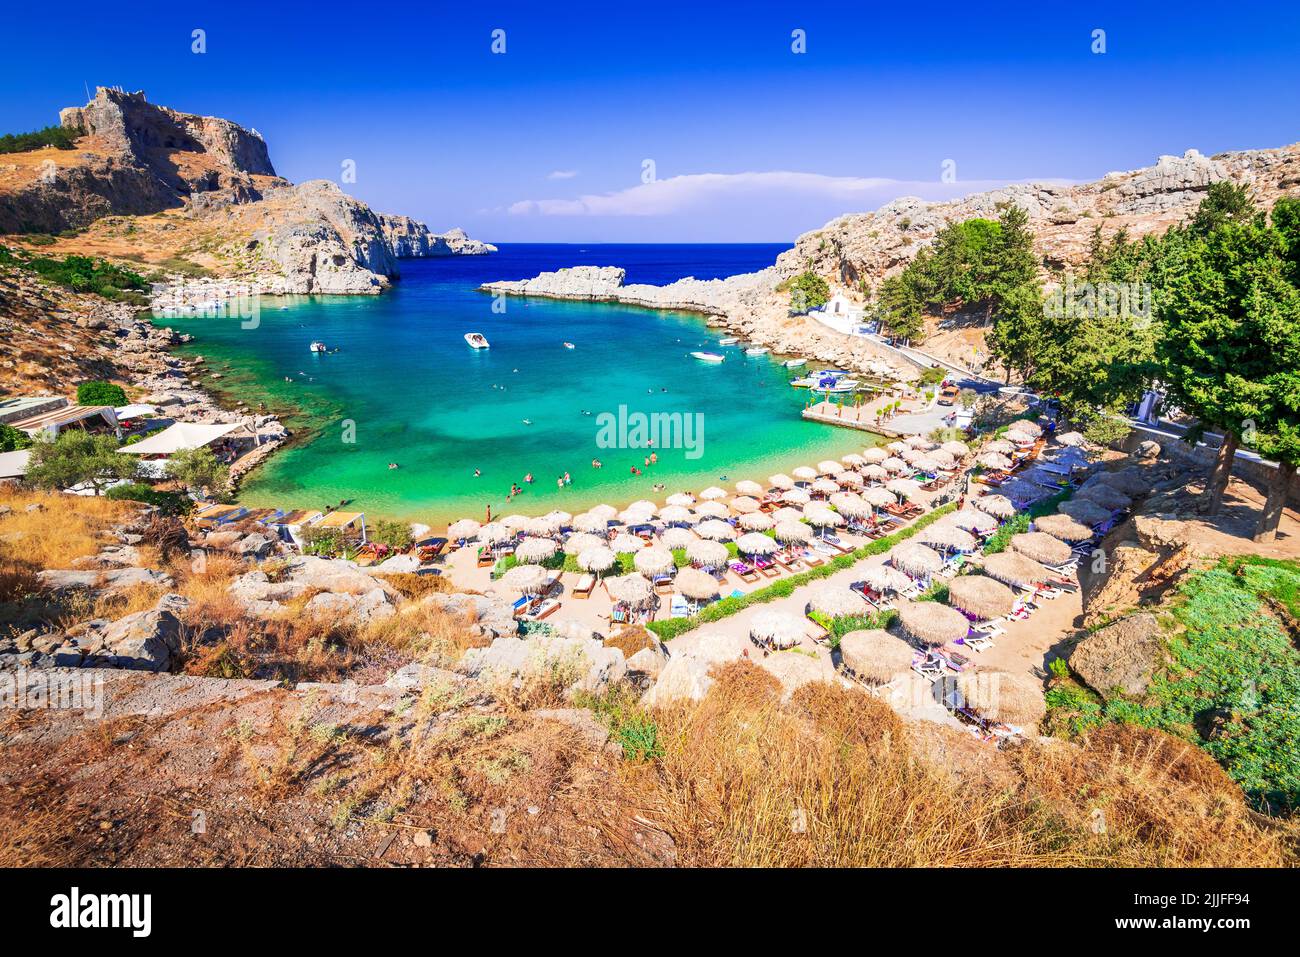 Rhodes, Greece. Saint Paul bay, Aegean Sea landscape with ancient town of Lindos and Acropolis rocky ruins. Stock Photo